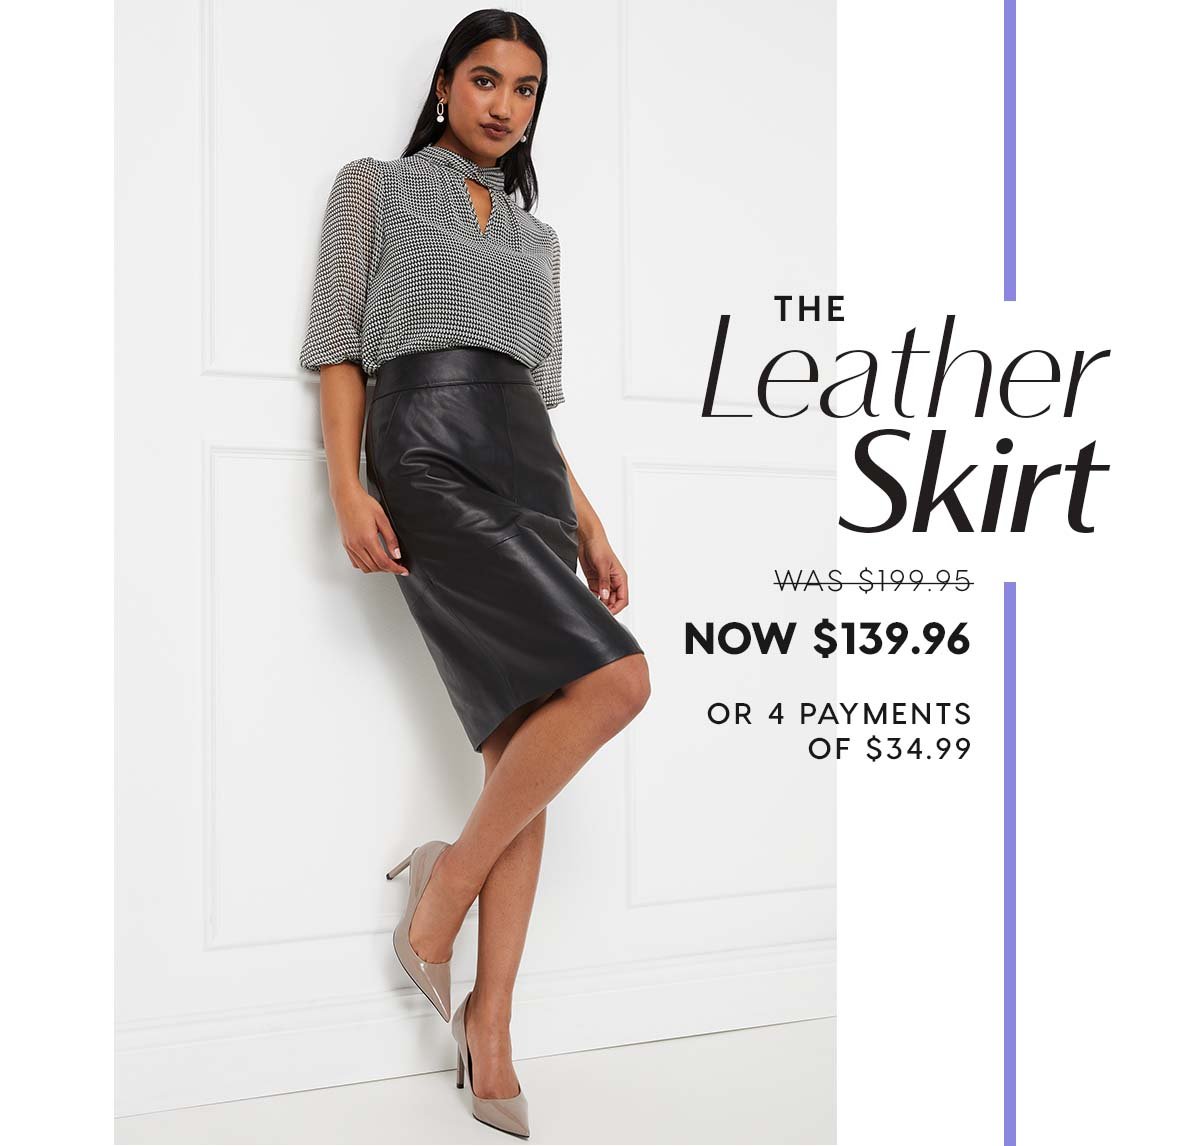 The Leather Skirt. WAS $199.95 NOW $139.96  or 4 payments of $34.99